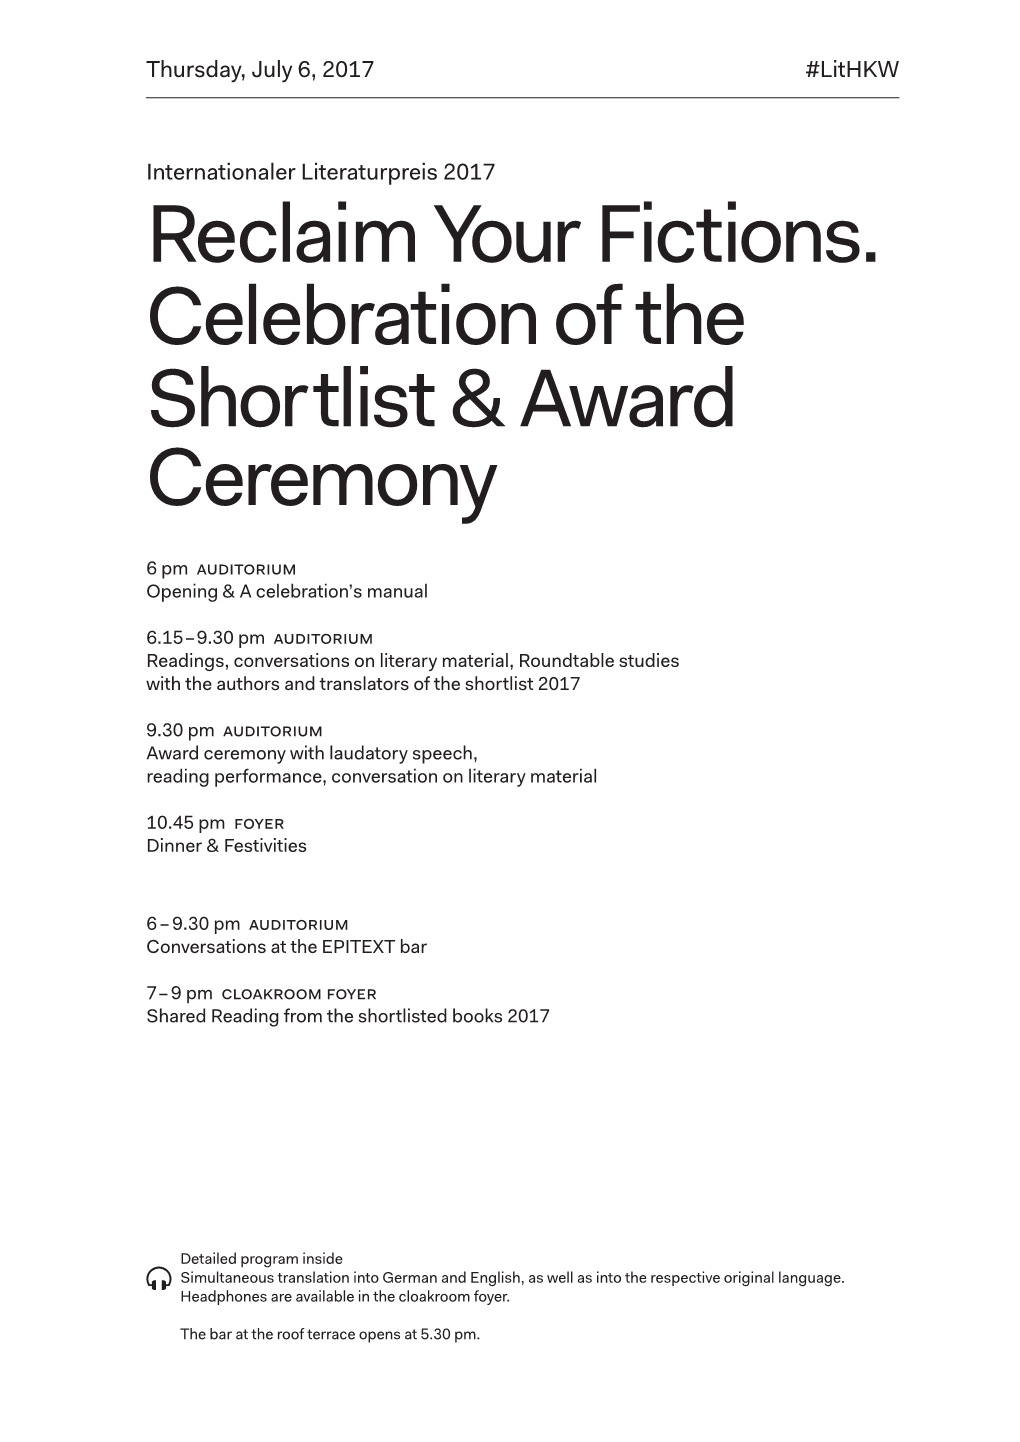 Reclaim Your Fictions. Celebration of the Shortlist & Award Ceremony